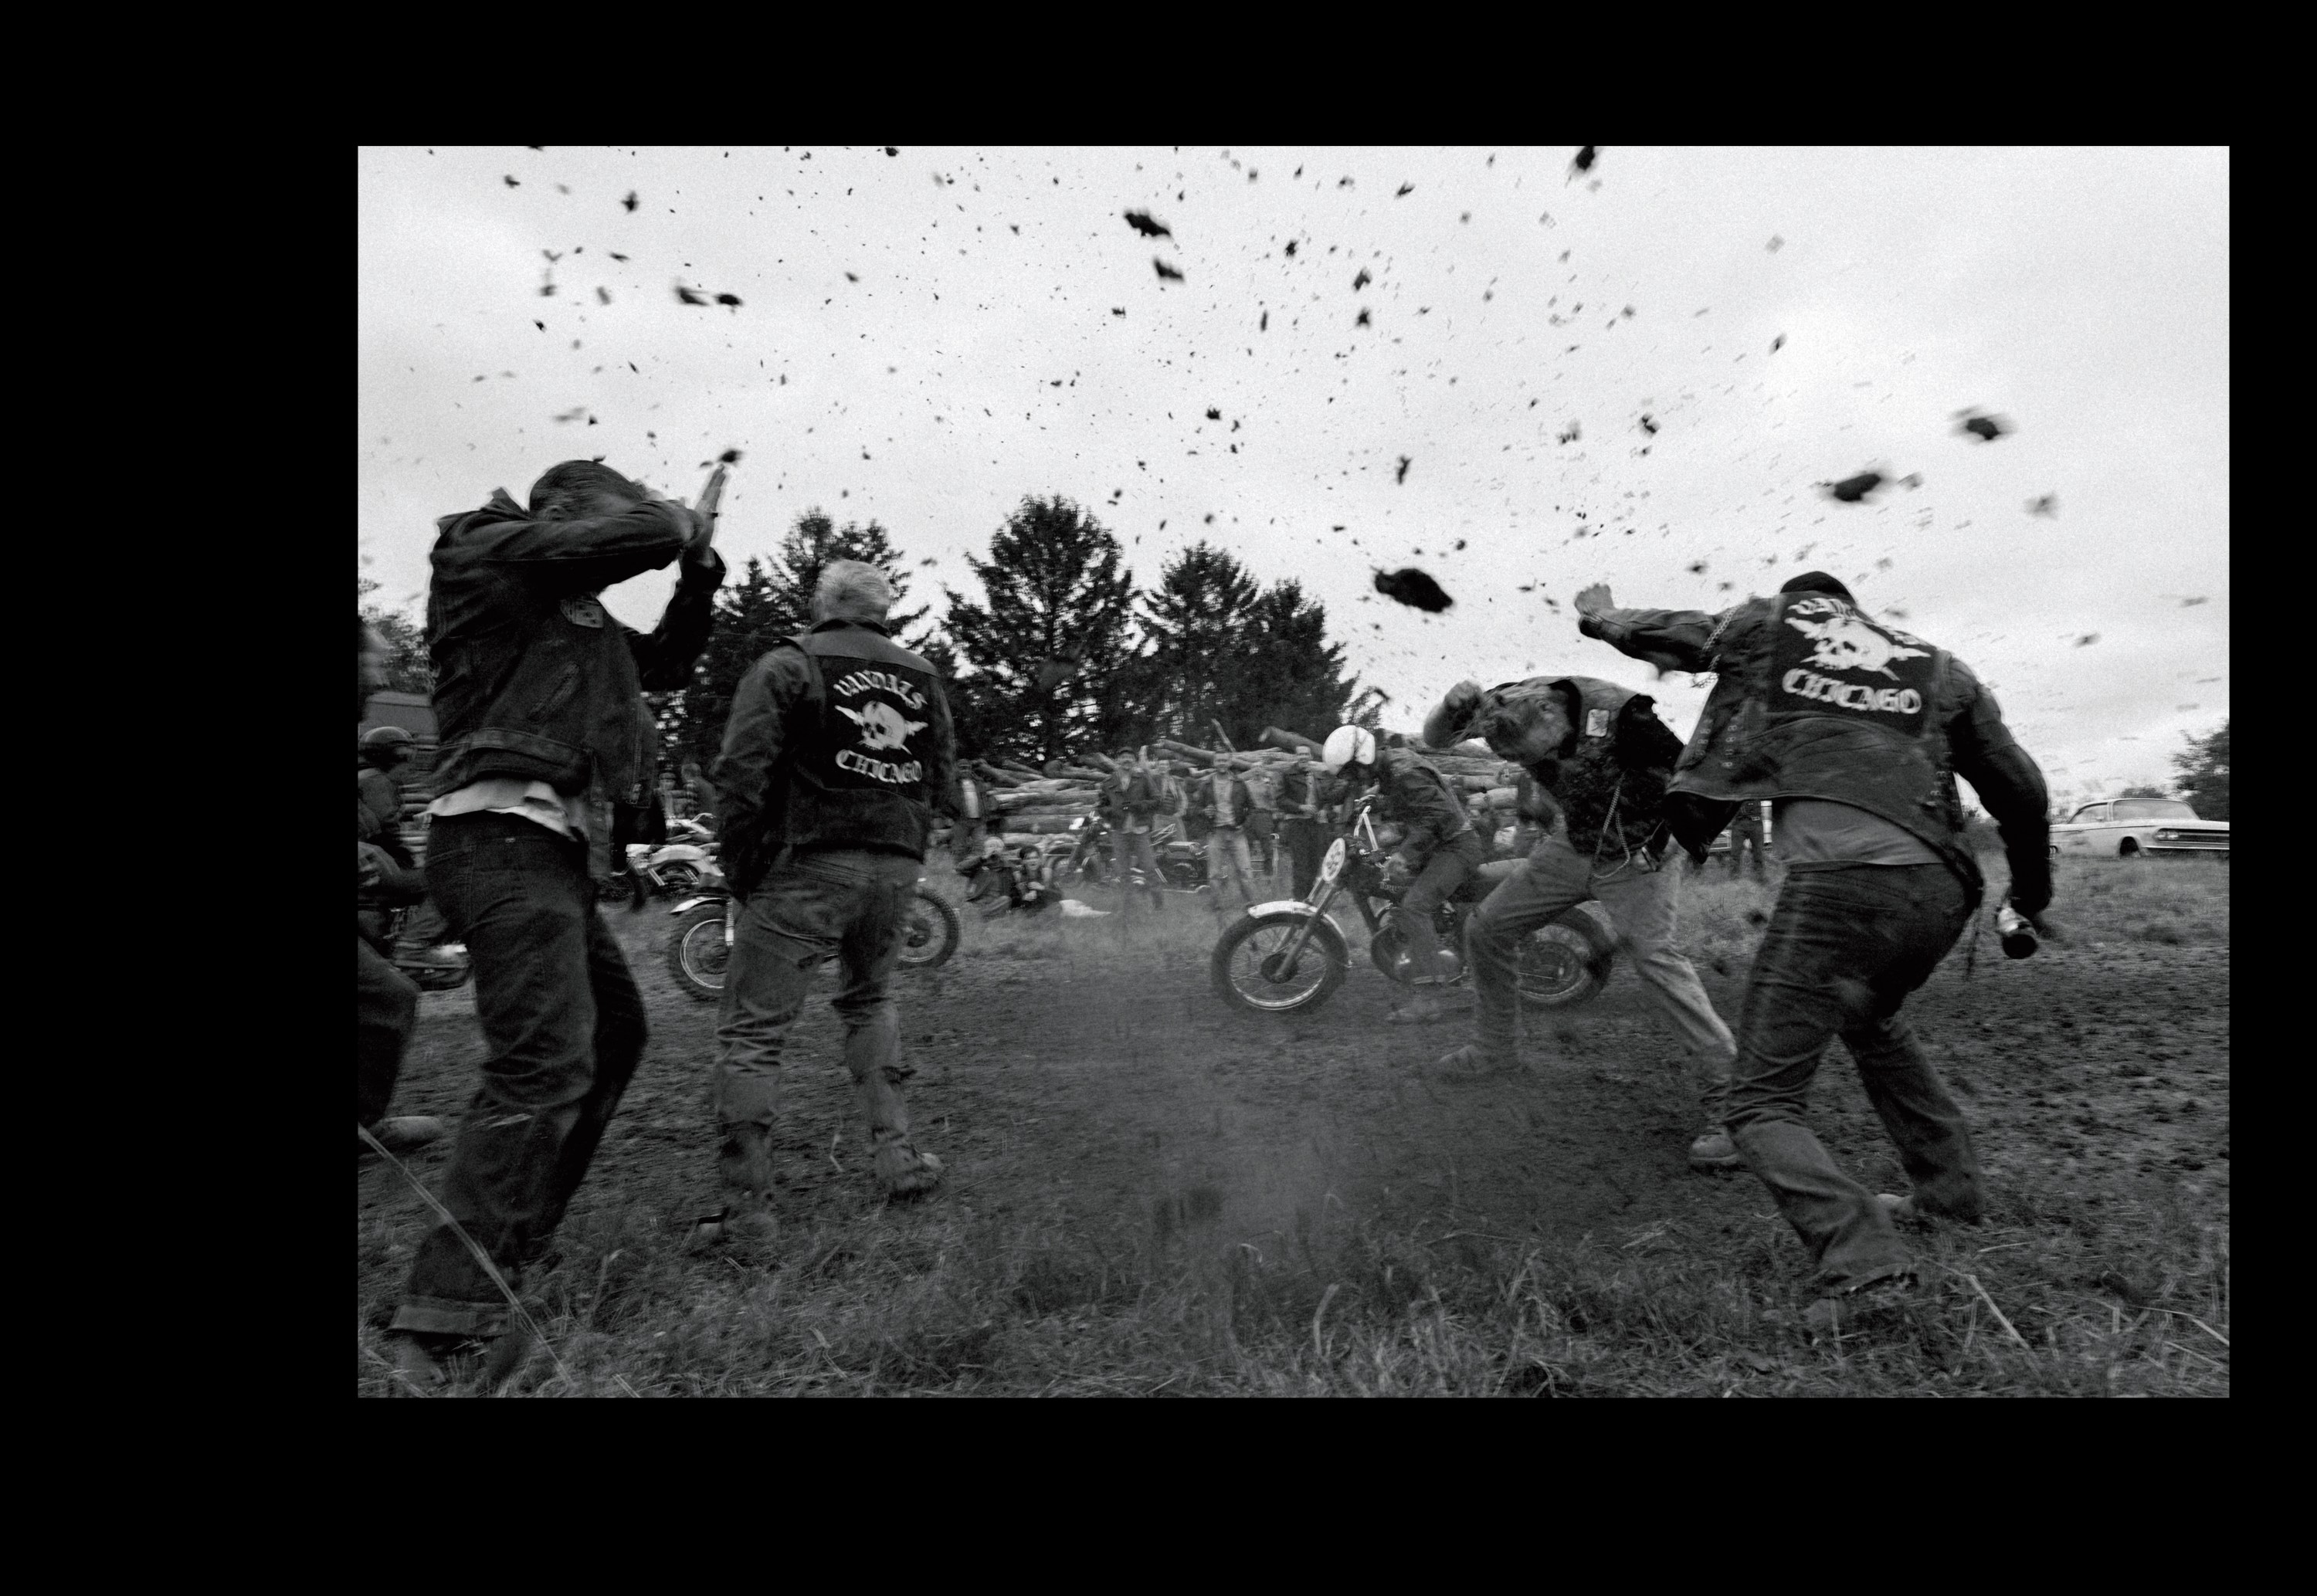 A scene captured for 'Vandals: The Photography of The Bikeriders' (Insight Editions)